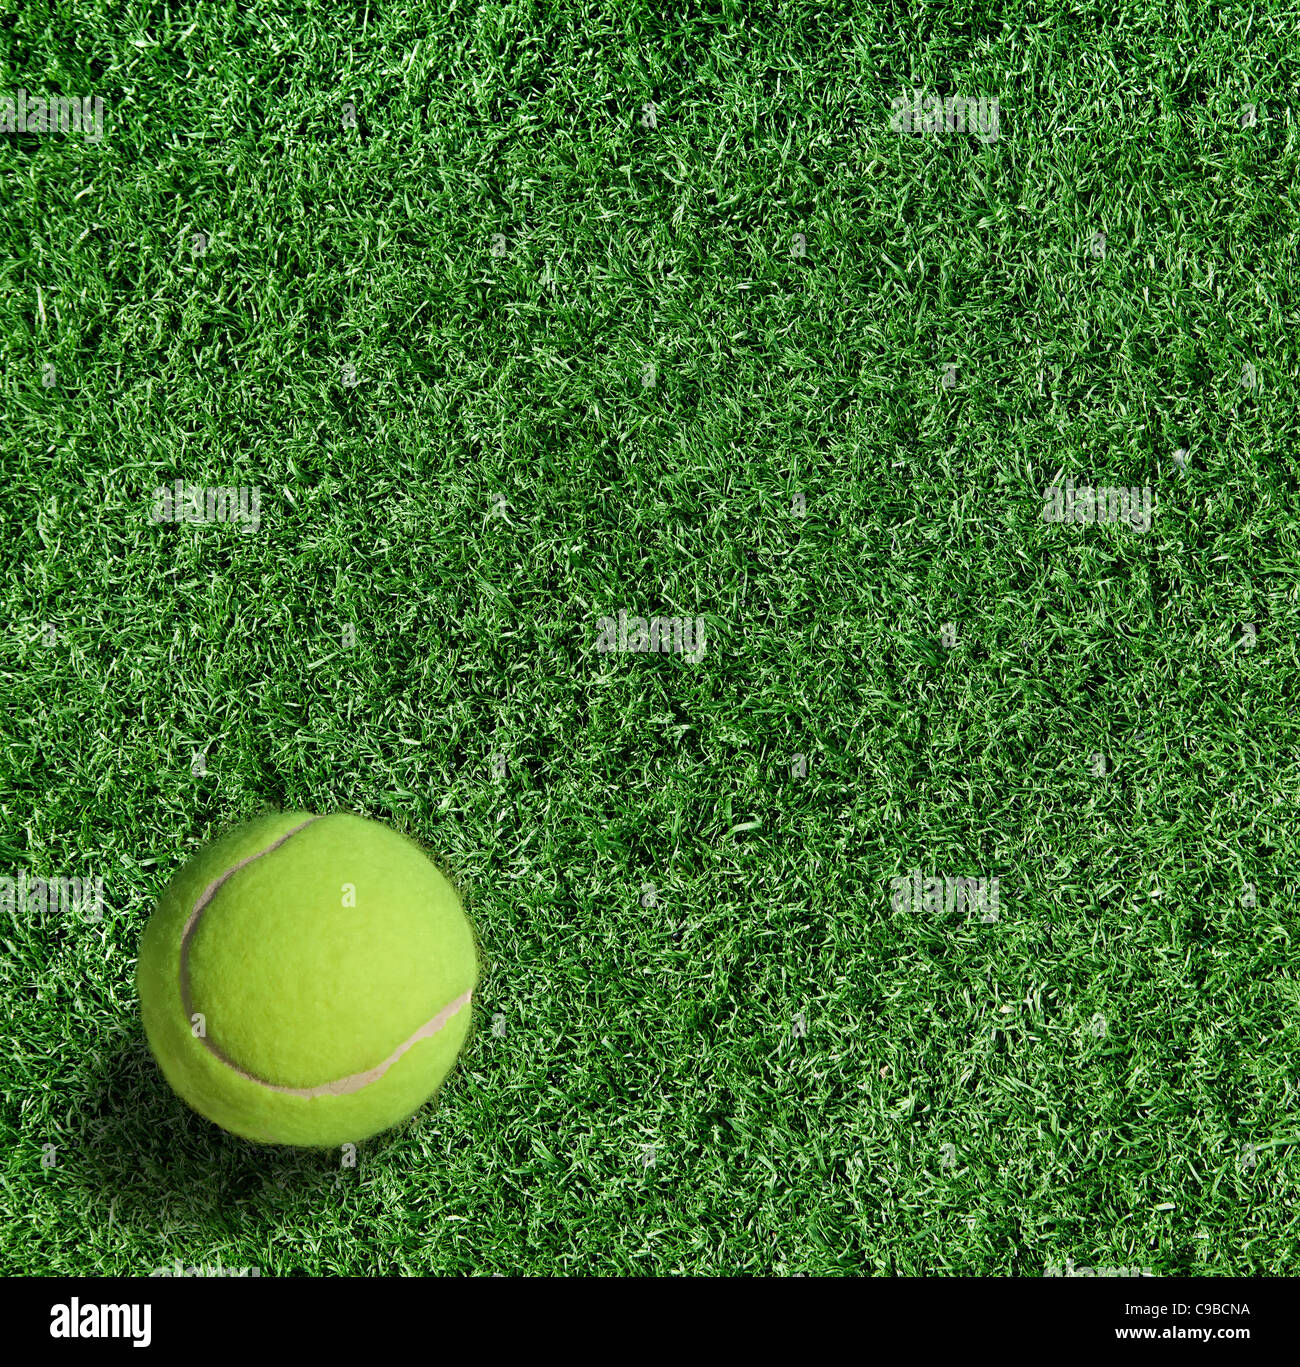 The grass is green, small, close-up. Background Stock Photo